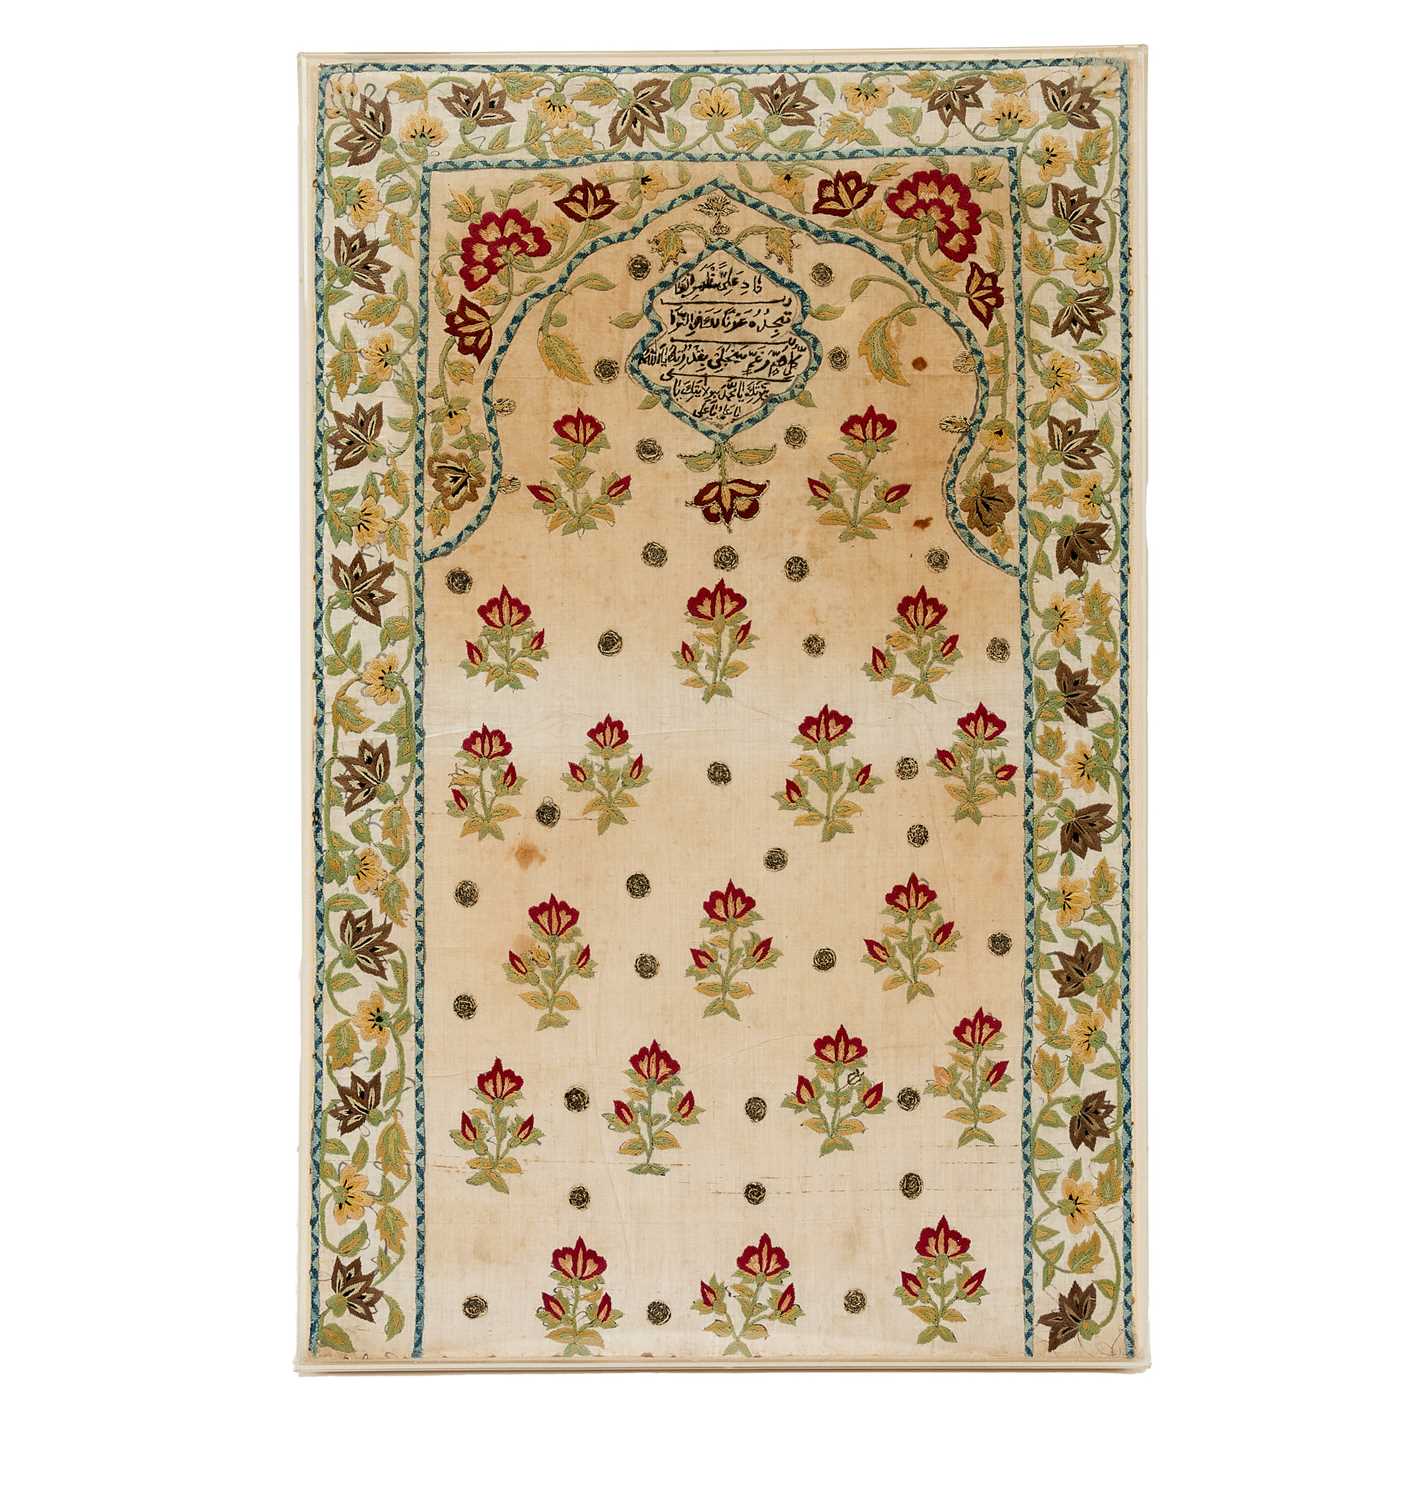 AN 18TH CENTURY INDIAN MUGHAL EMBROIDERED PANEL WITH QURANIC INSCRIPTIONS